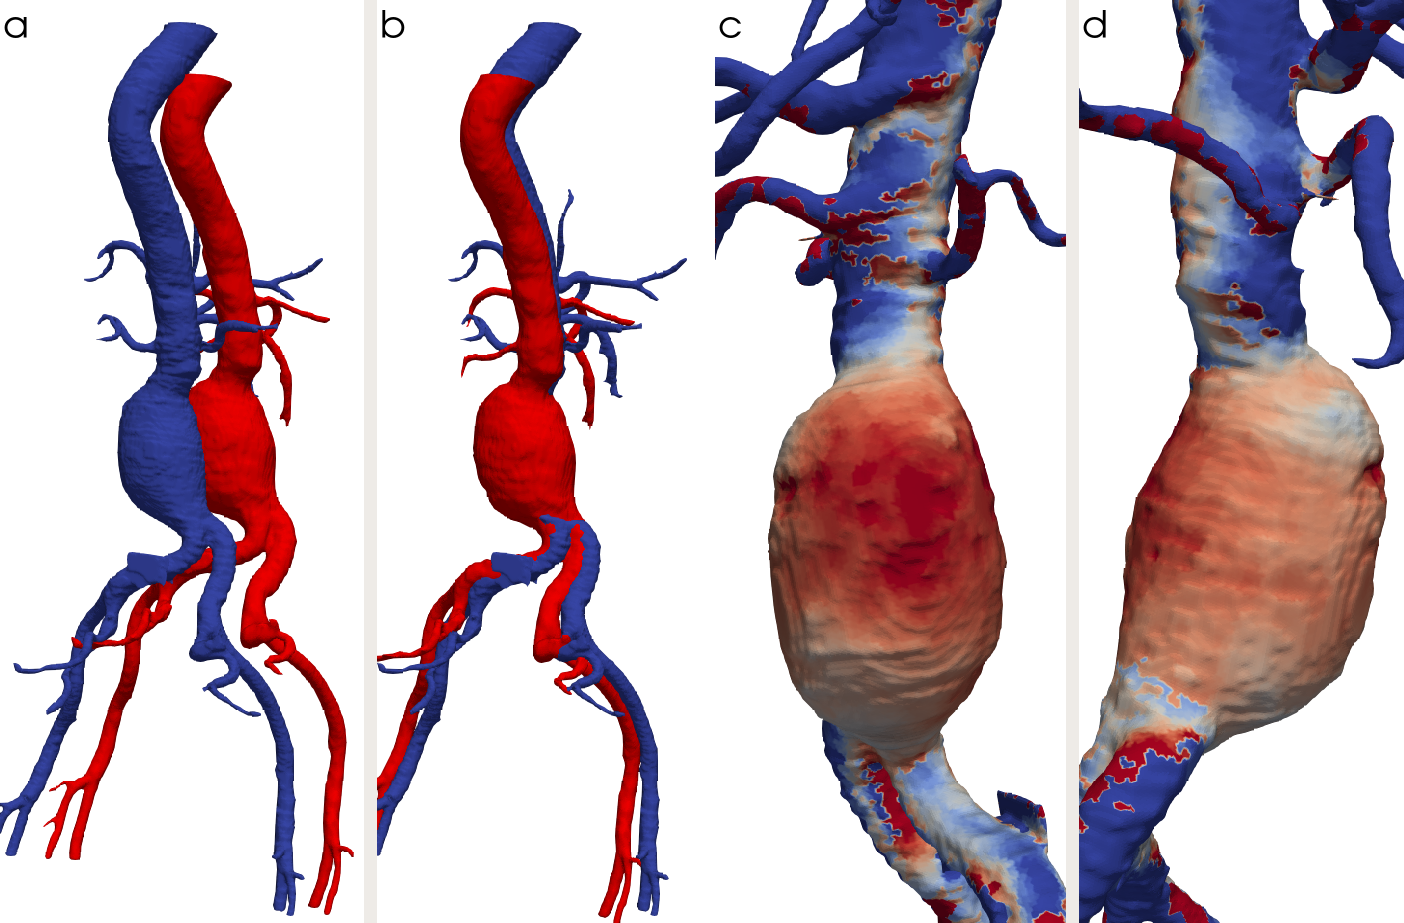 Example of registration. a and b: CT scans (blue: first CT scan; red: second CT scan) before and after registration. c and d: visualization of the evolution after registration. The aneurysm shrunk on the blue parts and grew on the red parts.